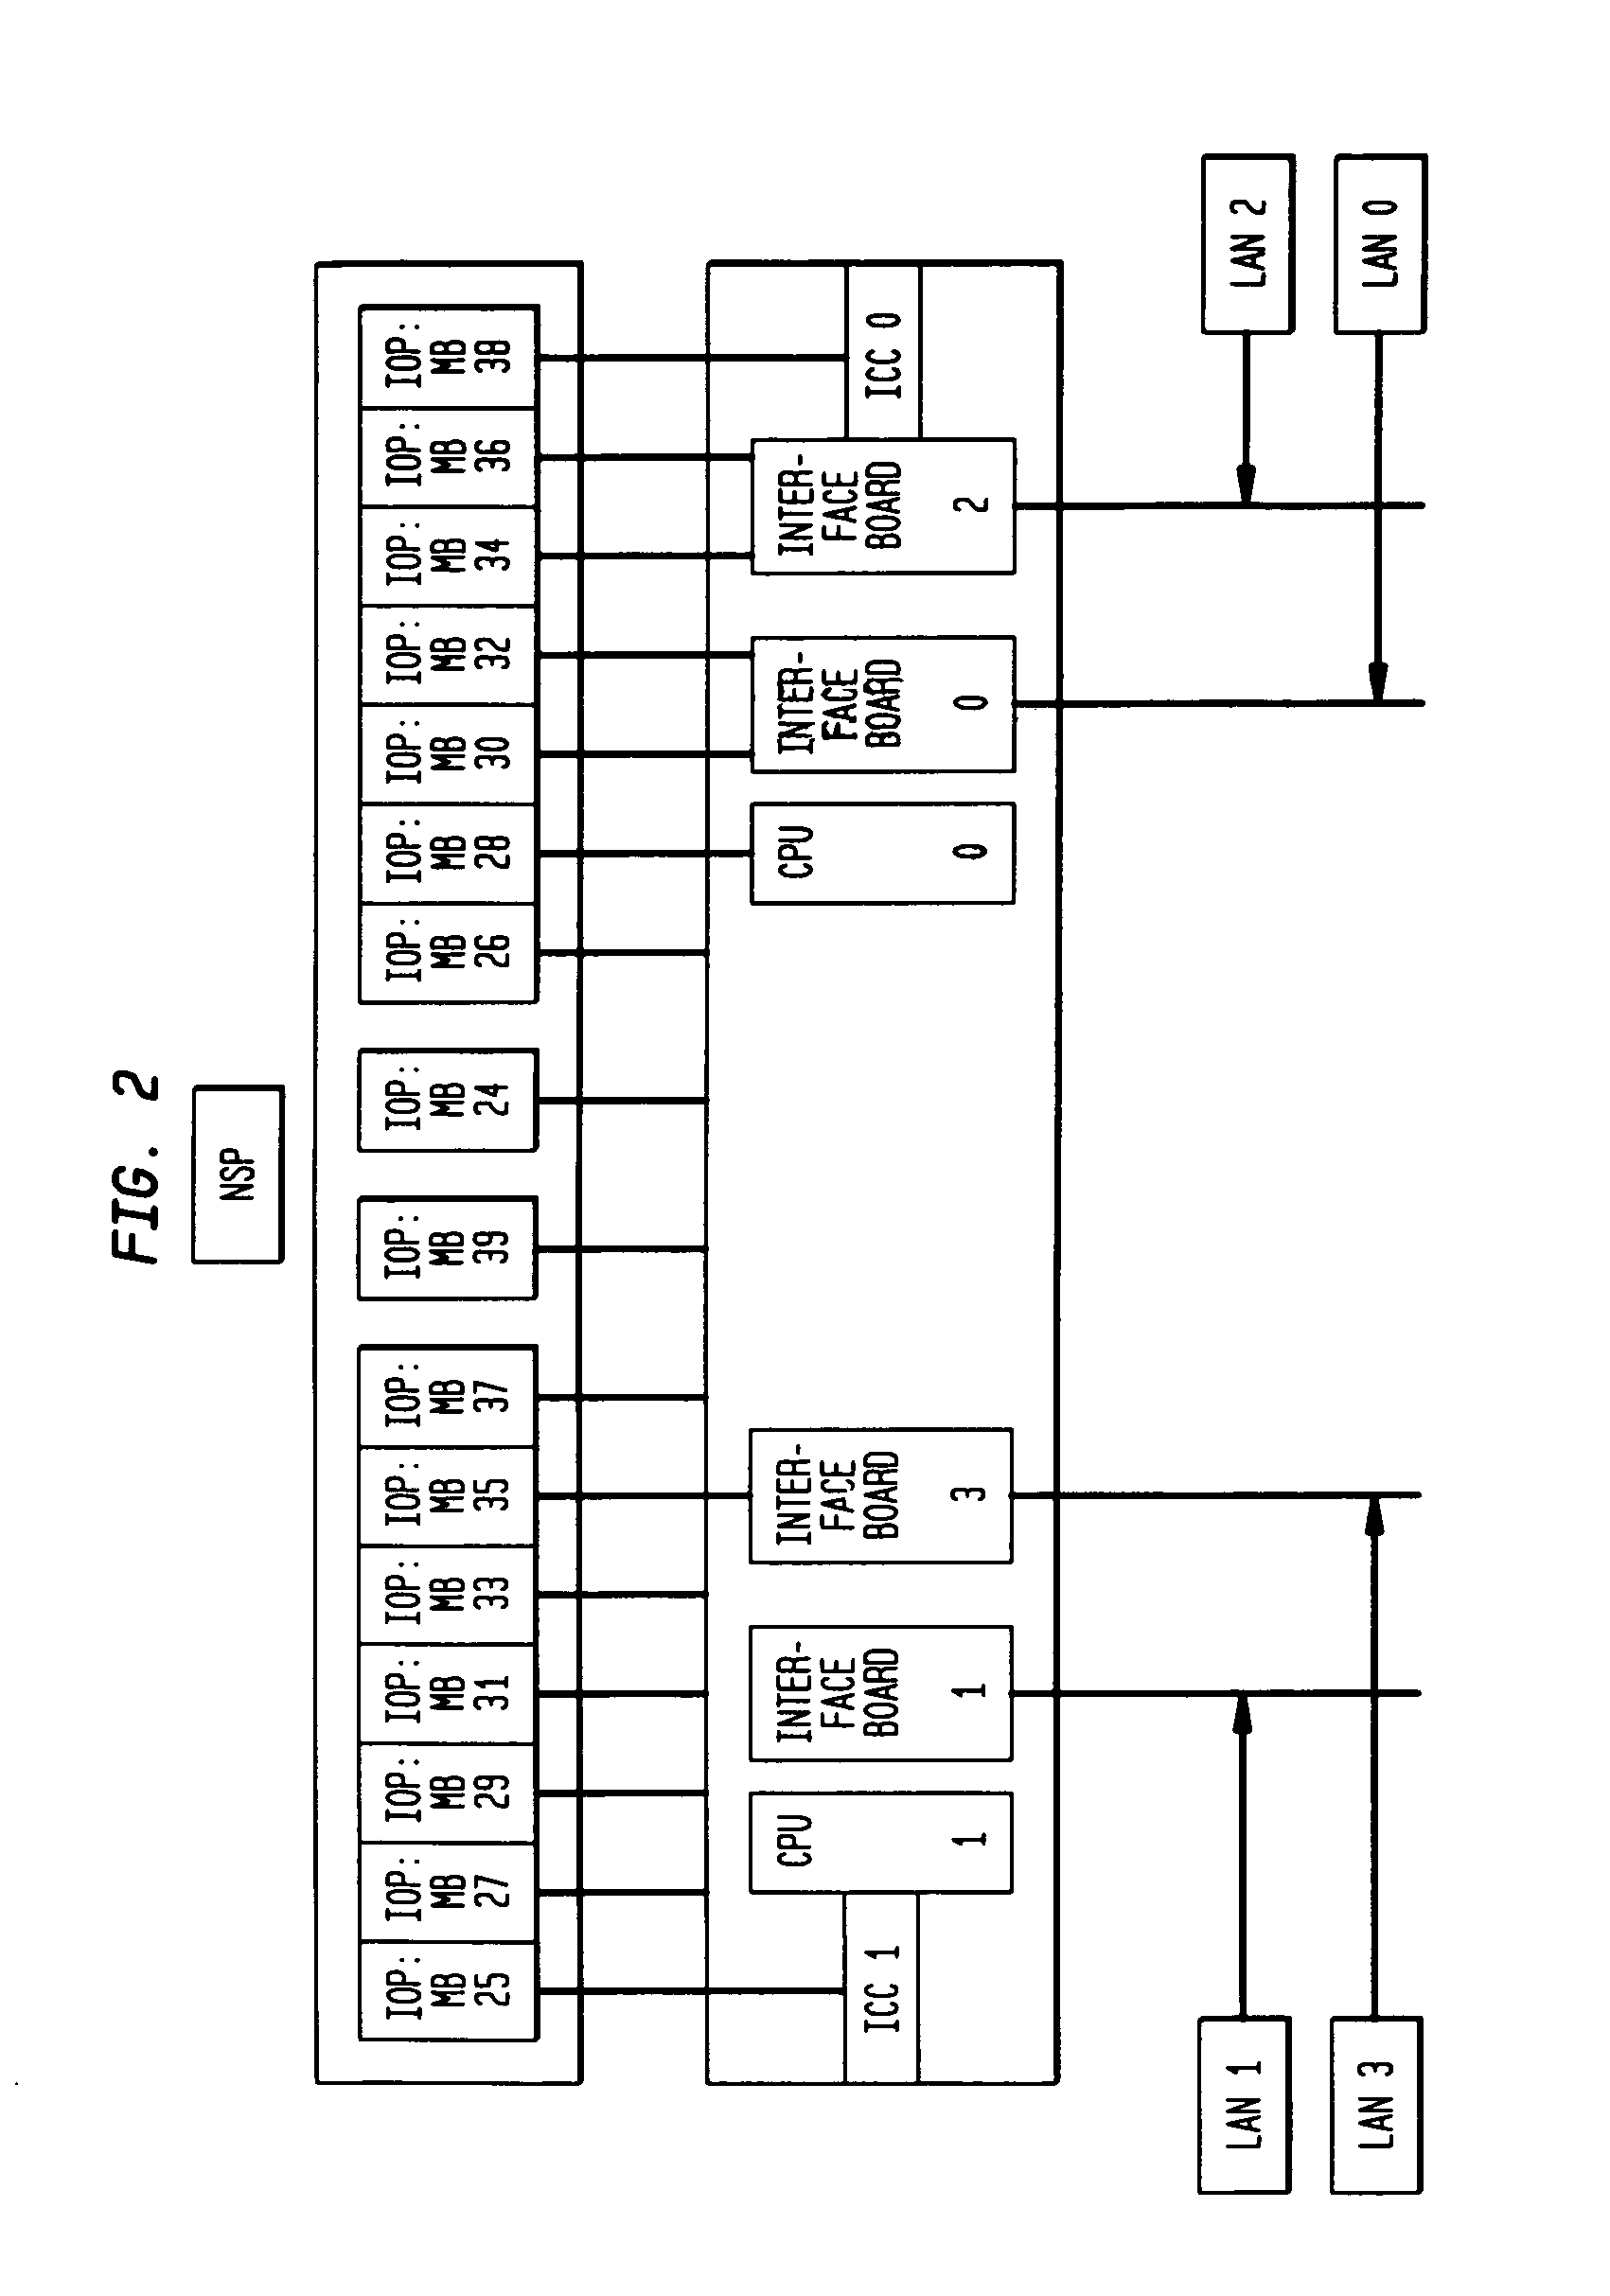 Method and apparatus for a messaging protocol within a distributed telecommunications architecture